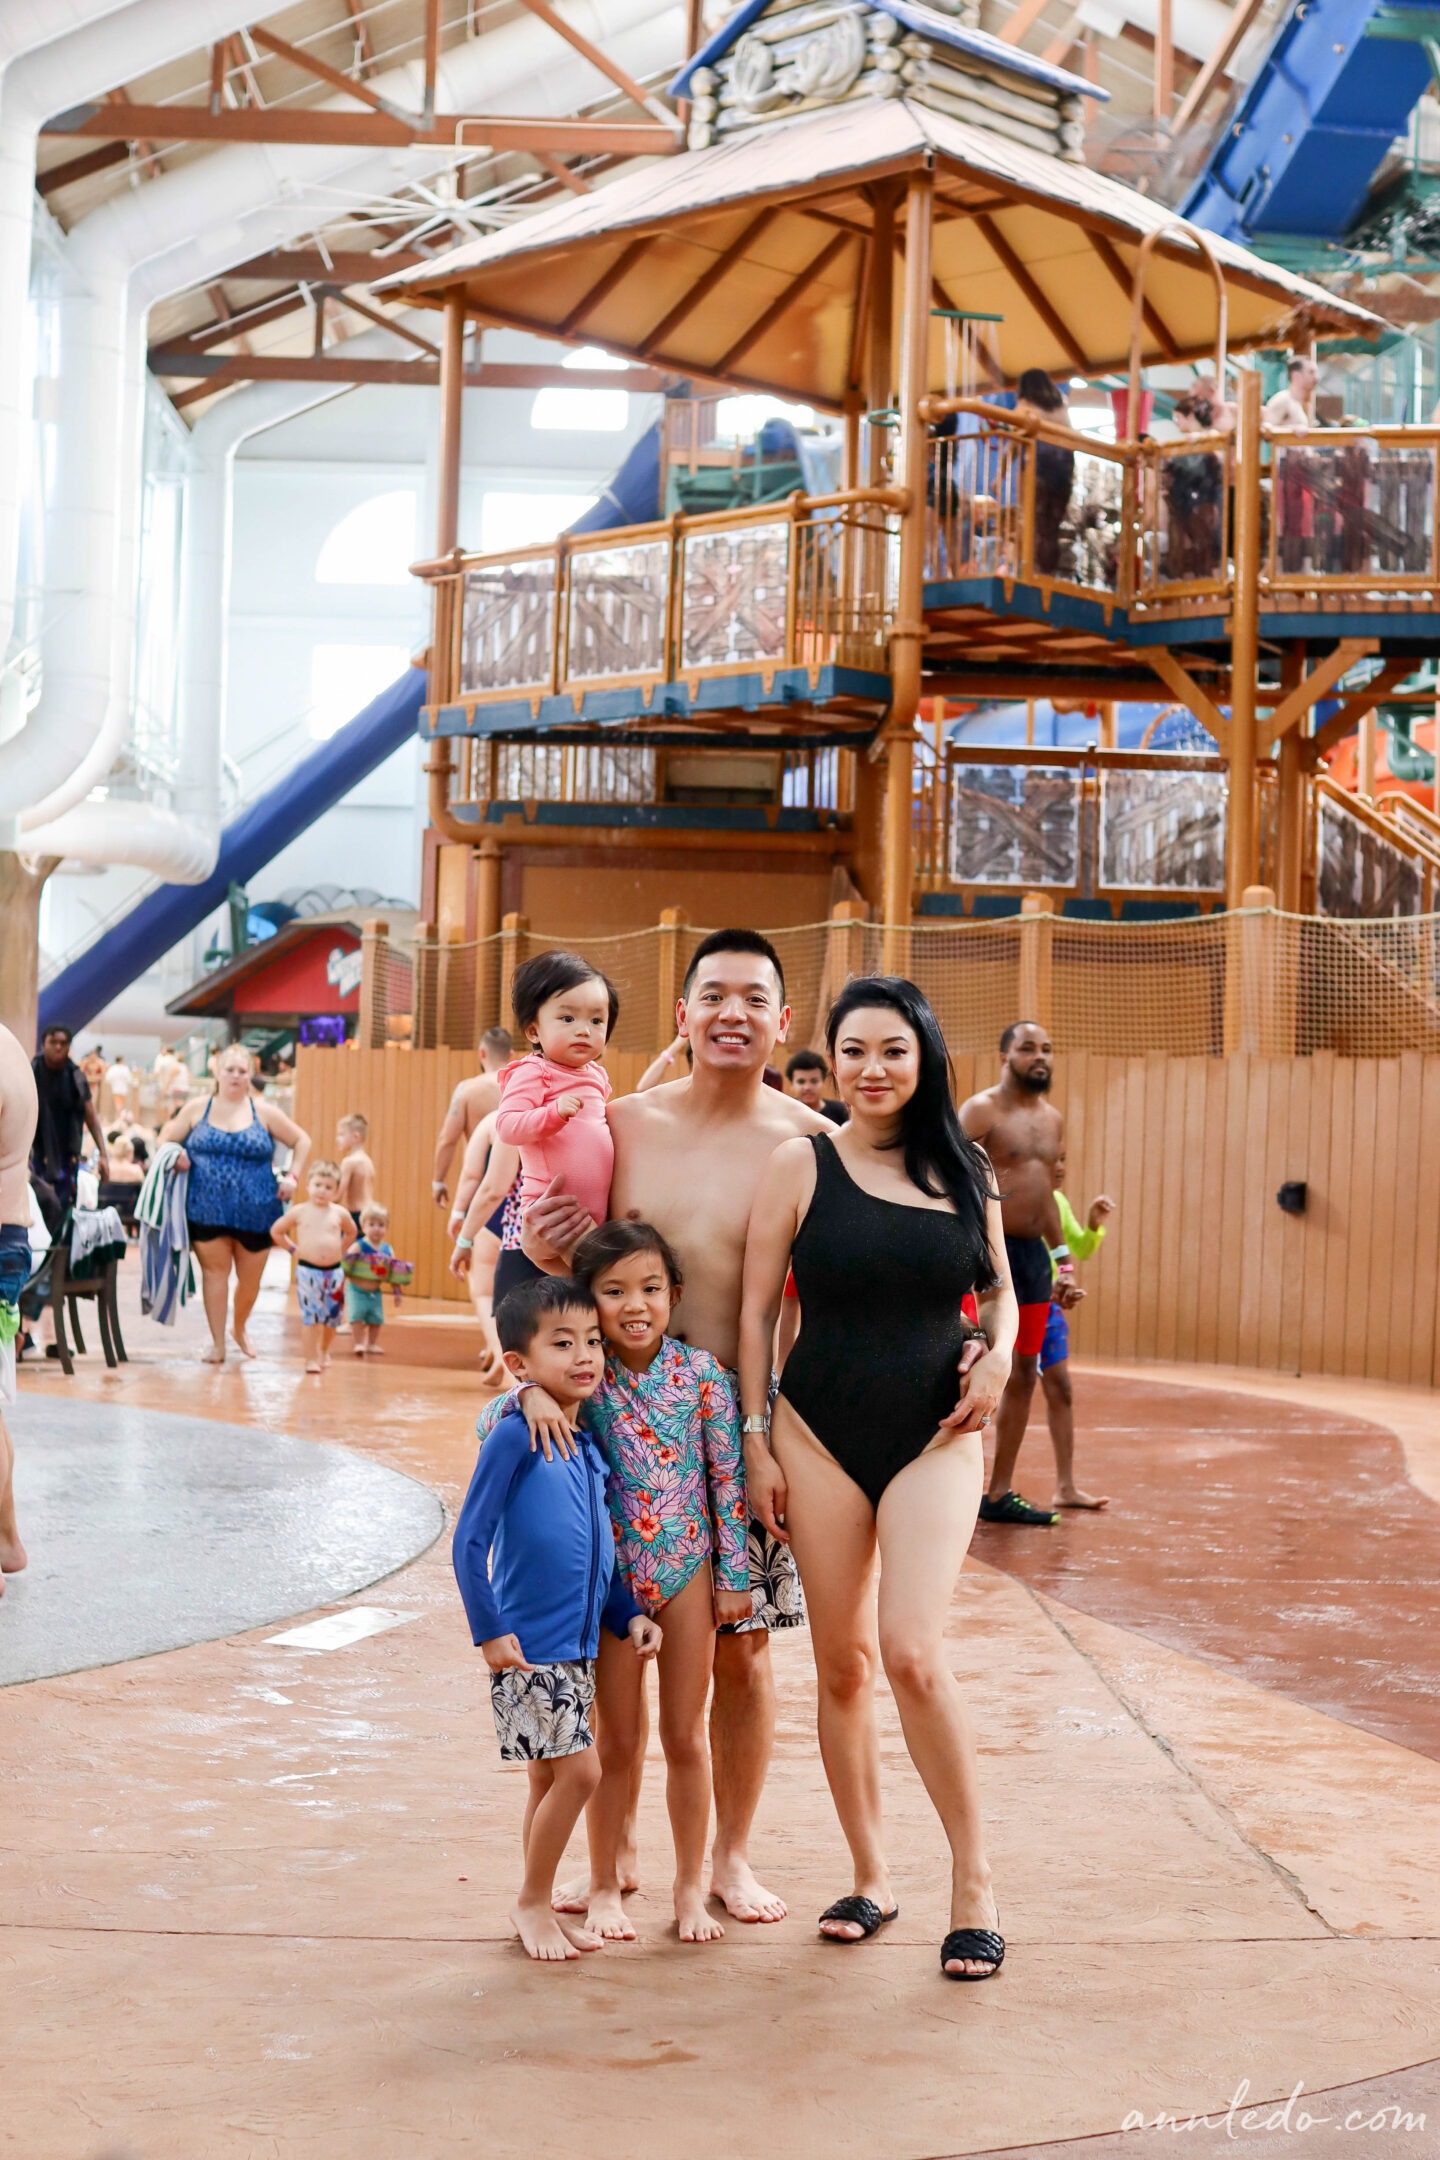 A Winter Family Getaway // Great Wolf Lodge in the Poconos, PA